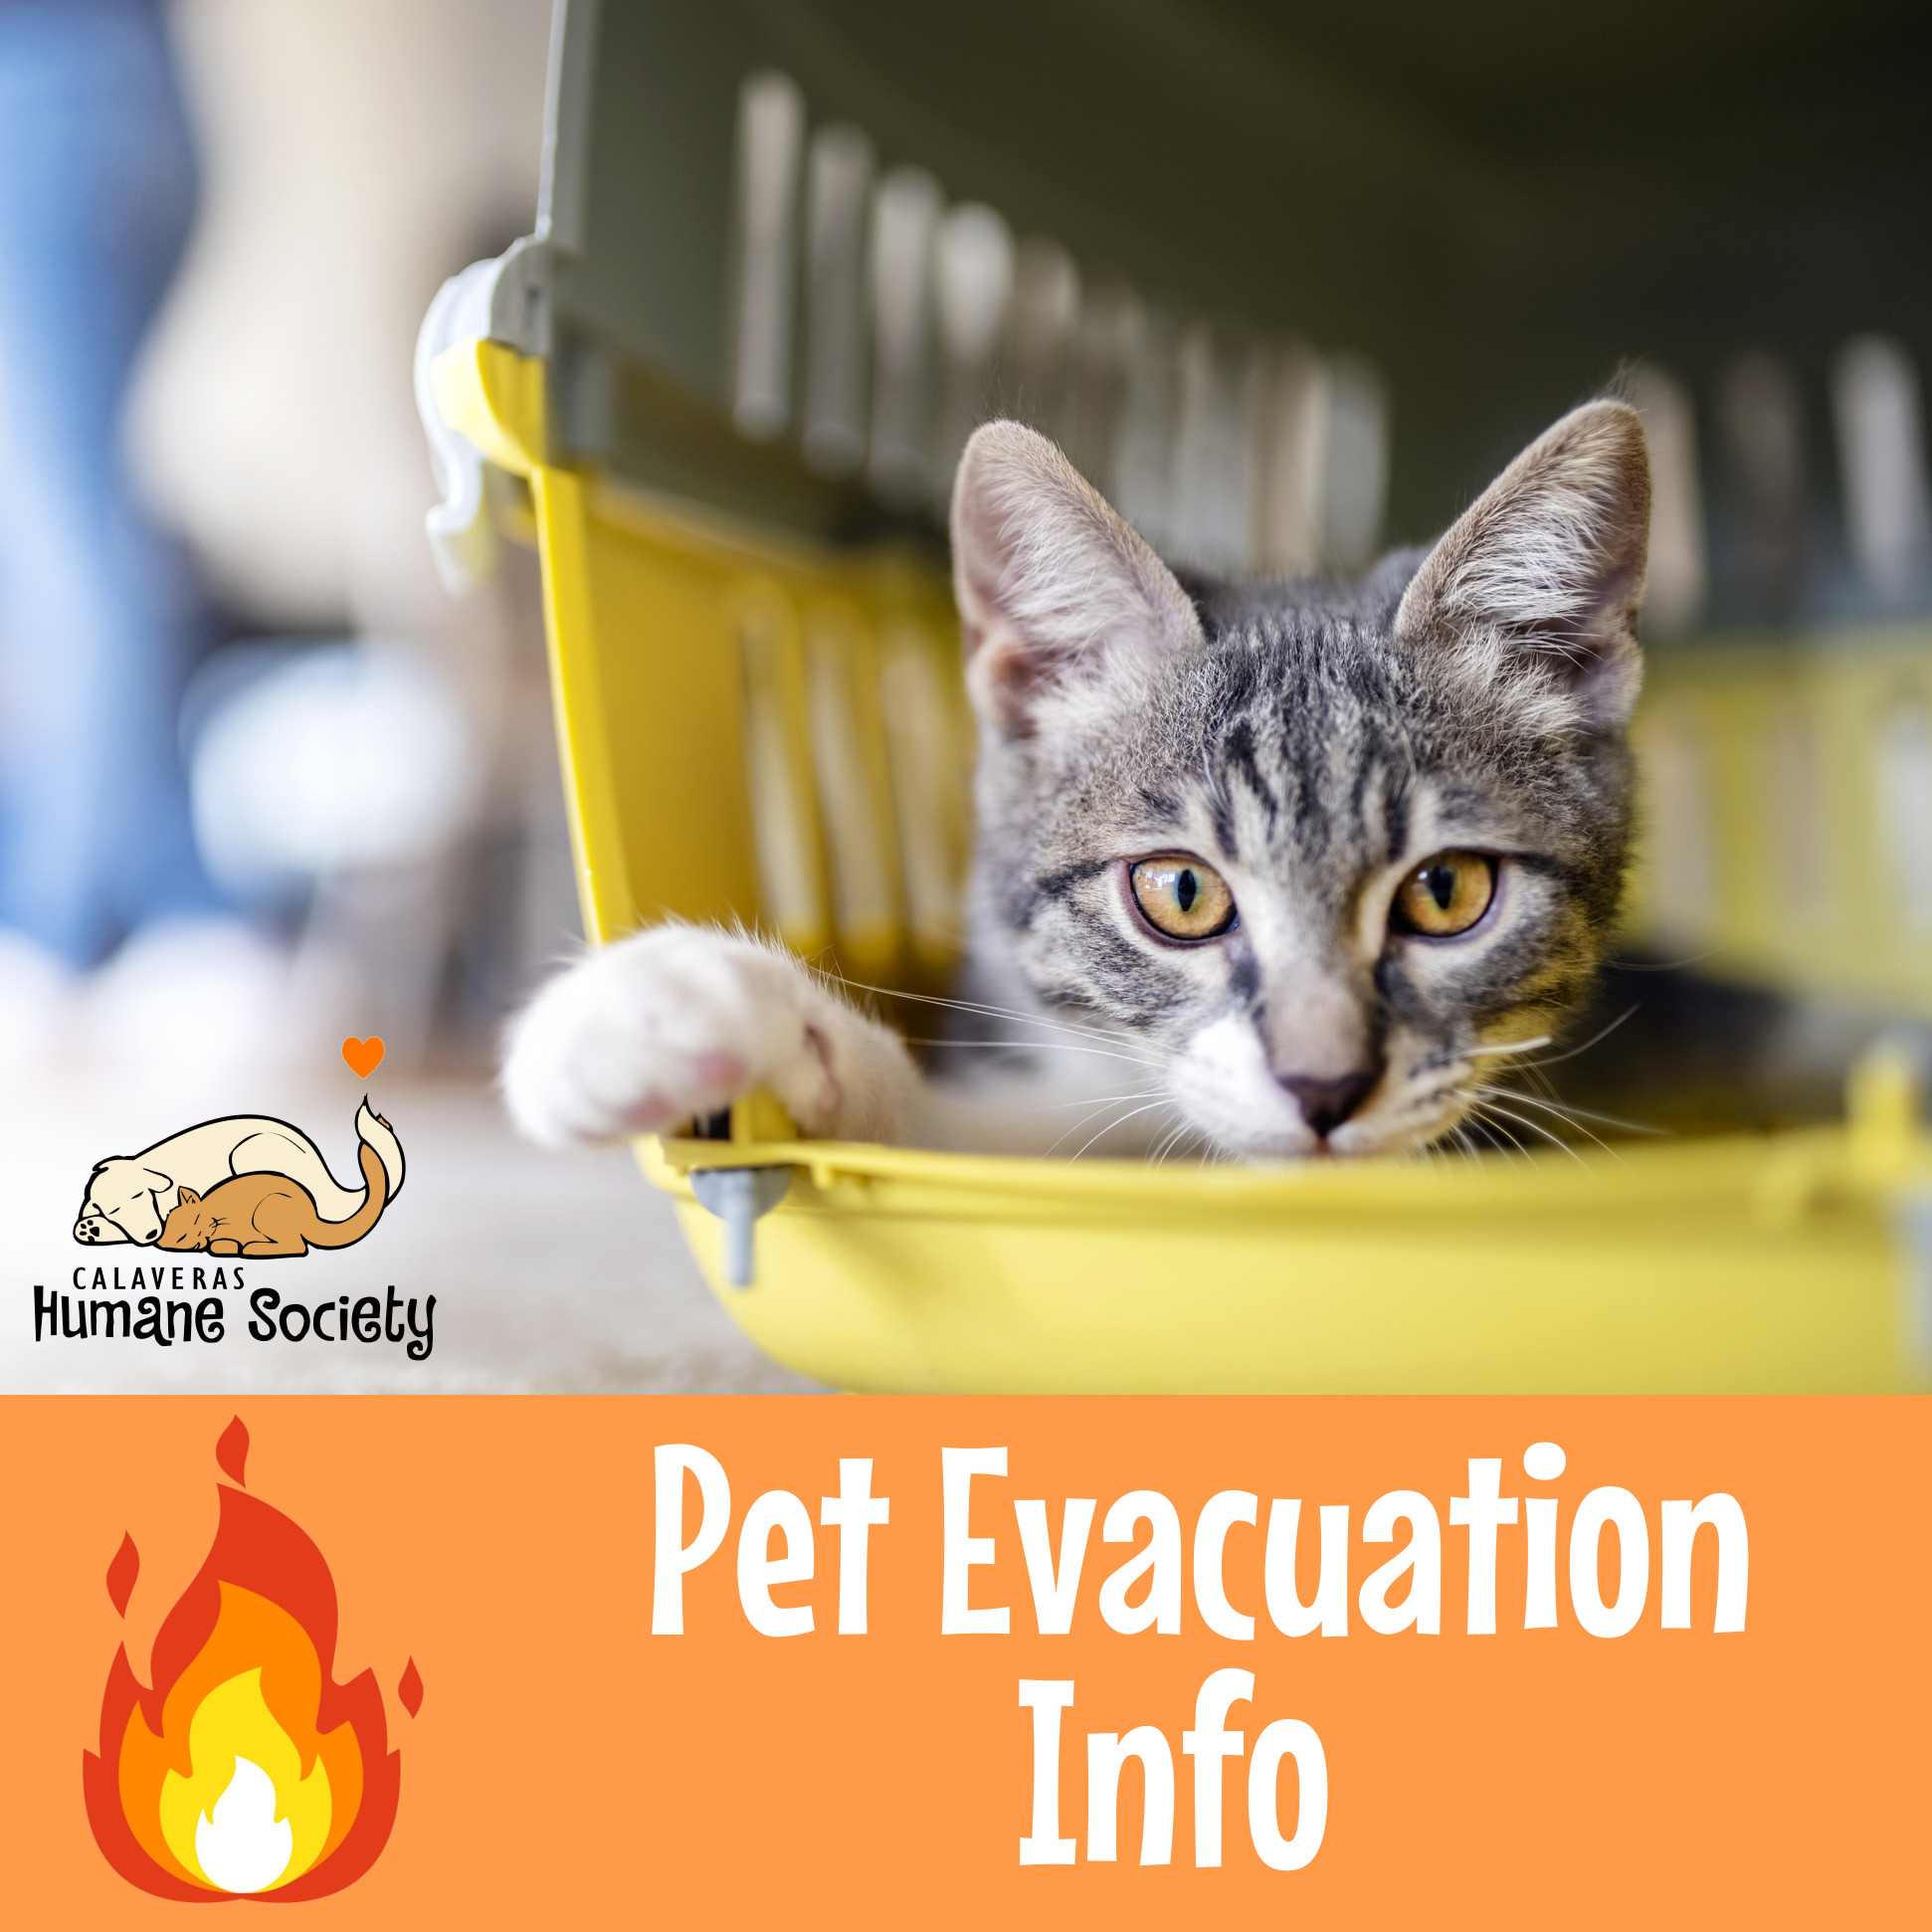 Cat in carrier - pet evacuation information